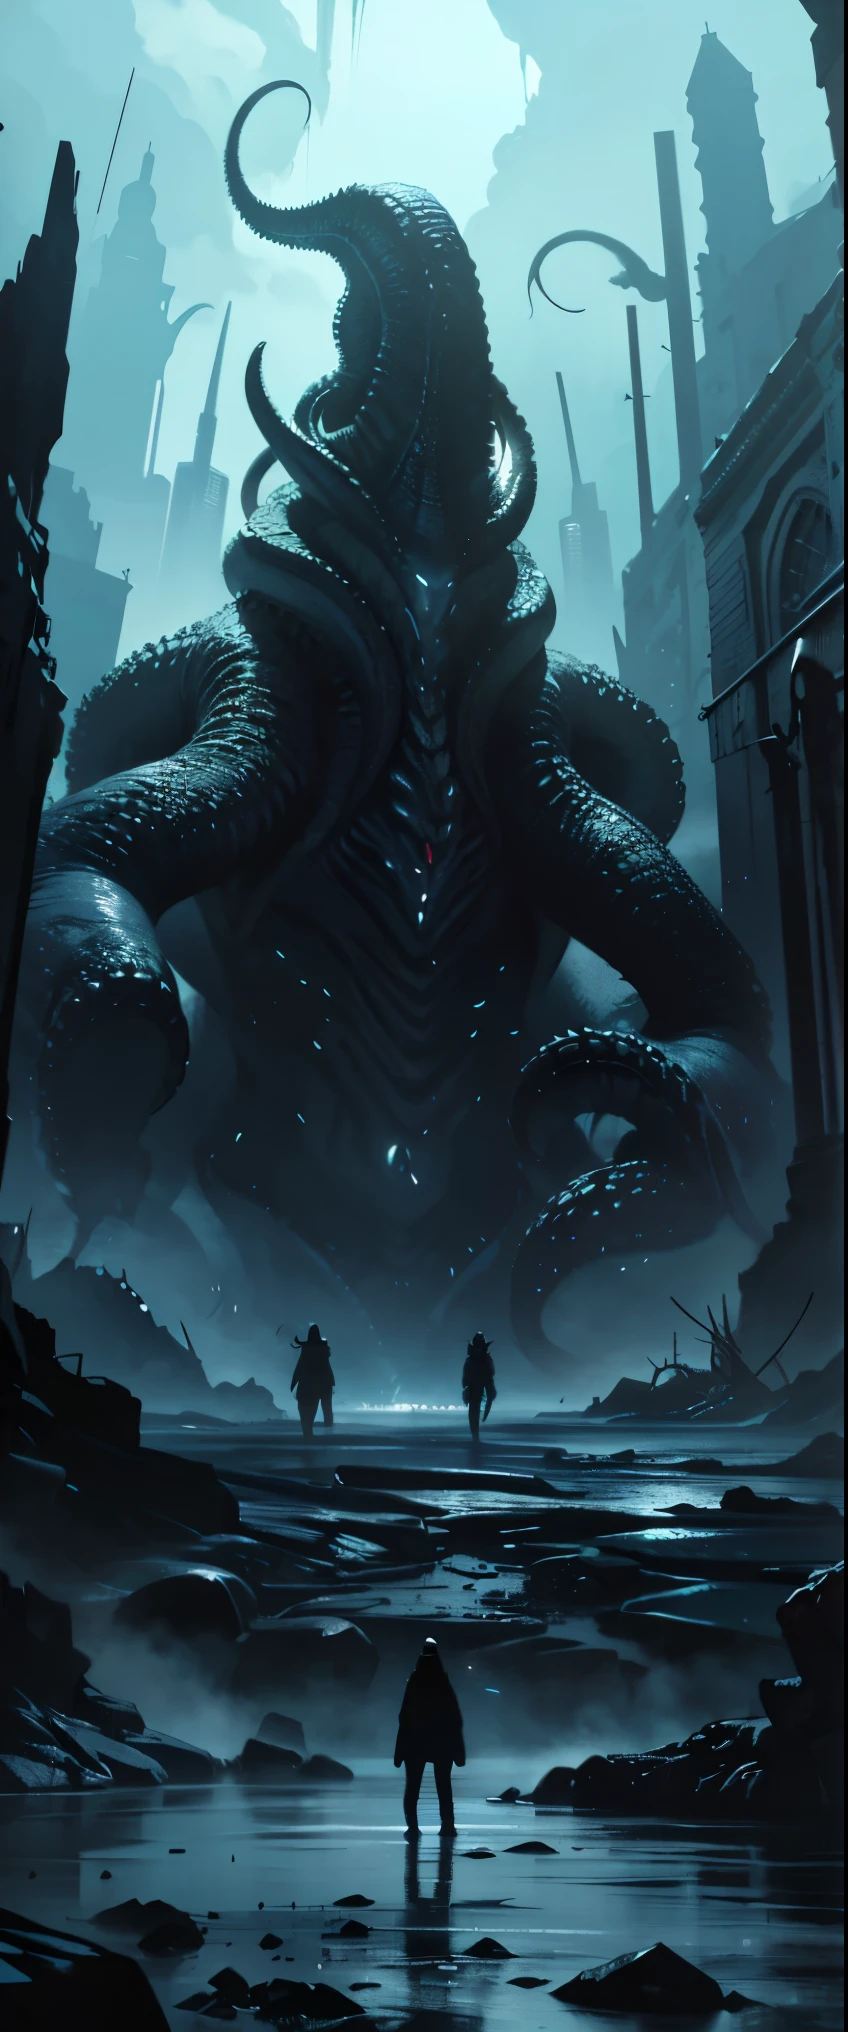 ((masterpiece, highest quality, Highest image quality, High resolution, photorealistic, Raw photo, 8K)), people taking pictures of a giant creature with their cell phones, lovecraftian background, lovecraftian atmosphere, giant cthulhu, huge creature, gigantic cthulhu, giant ethereal creature, eldritch being, lovecraftian monster, giant tentacles, an ominous fantasy illustration, looming creature with a long, nyarlathotep, lovecraftian landscape, 